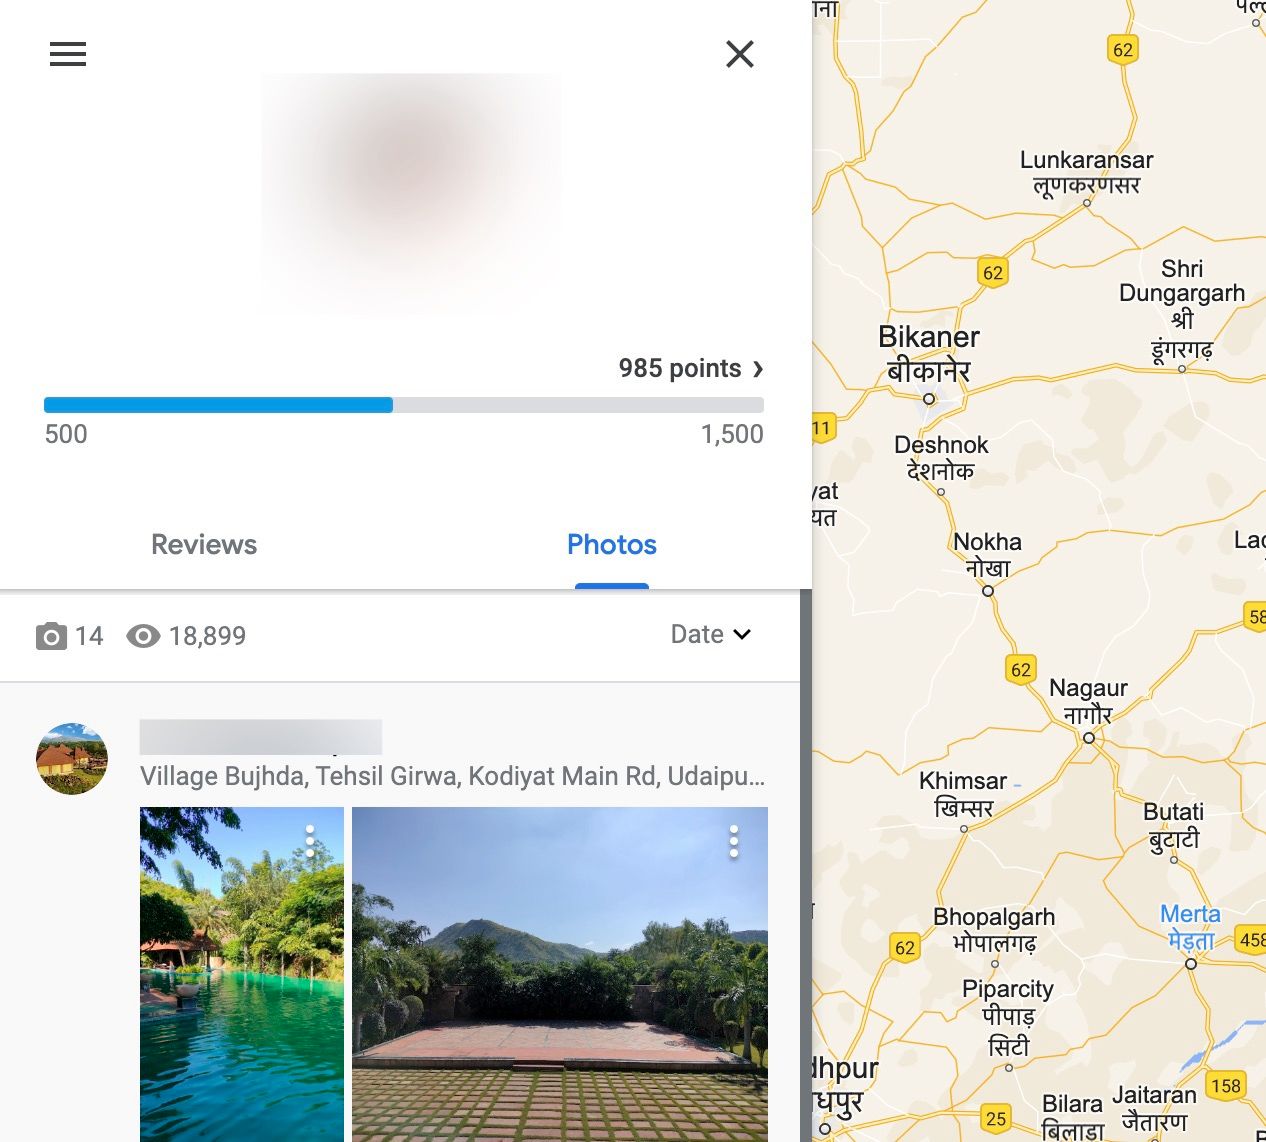 A screenshot showing a Google review with two photos alongside an open Google Maps view of the region of Rajasthan, India.